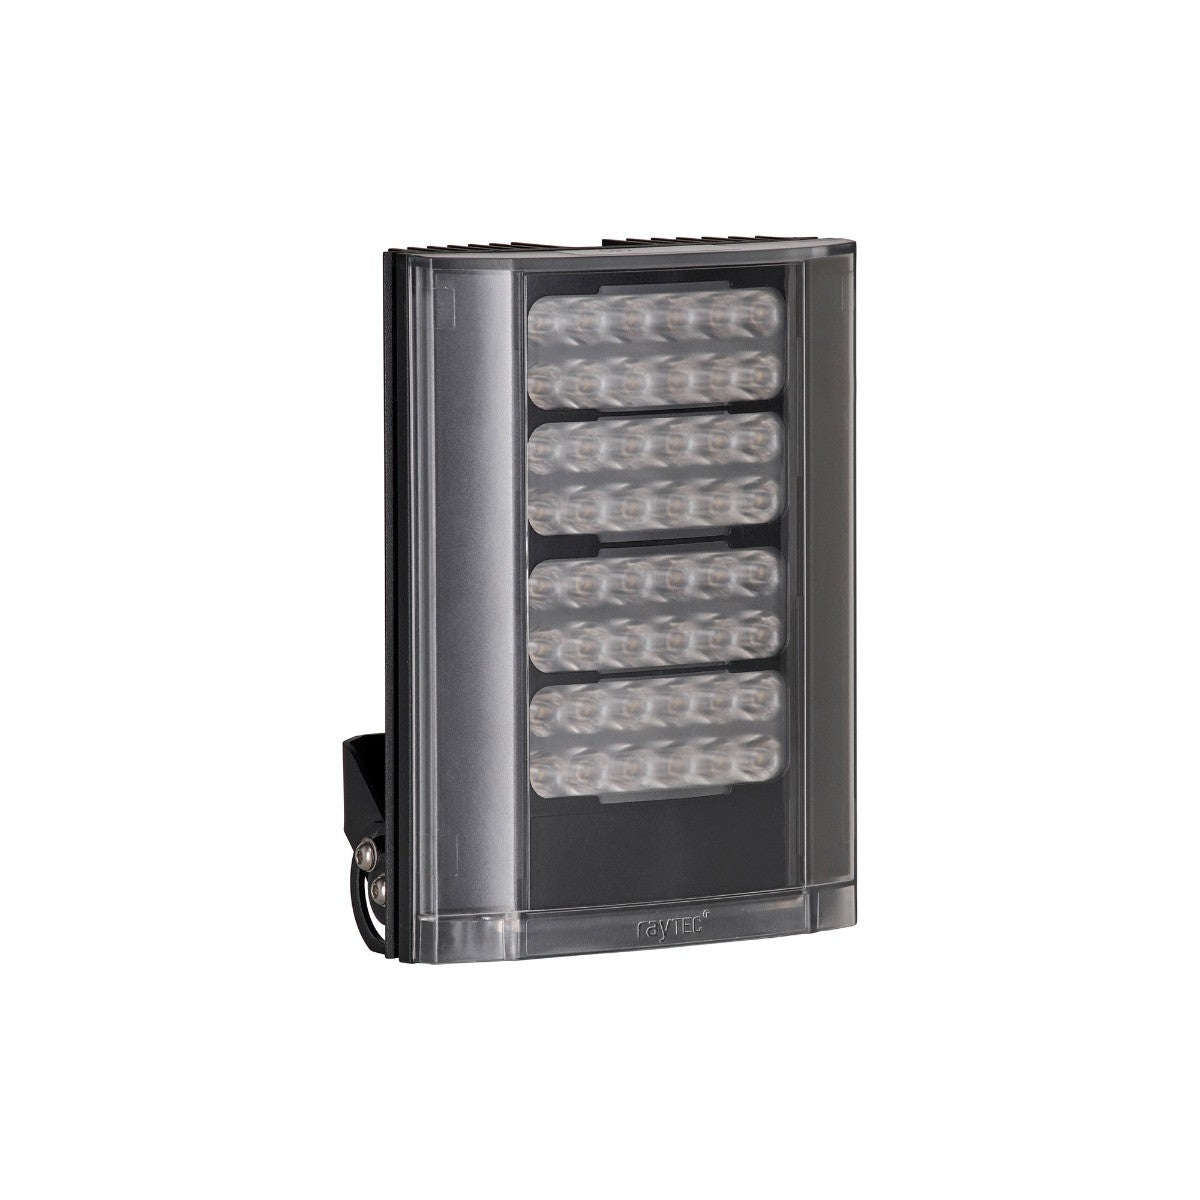 VARIO2 i6-1 standard pack, 10°x10°, 35°x10° and 60°x25° angles included, 12-24V AC/DC, black, 850nm